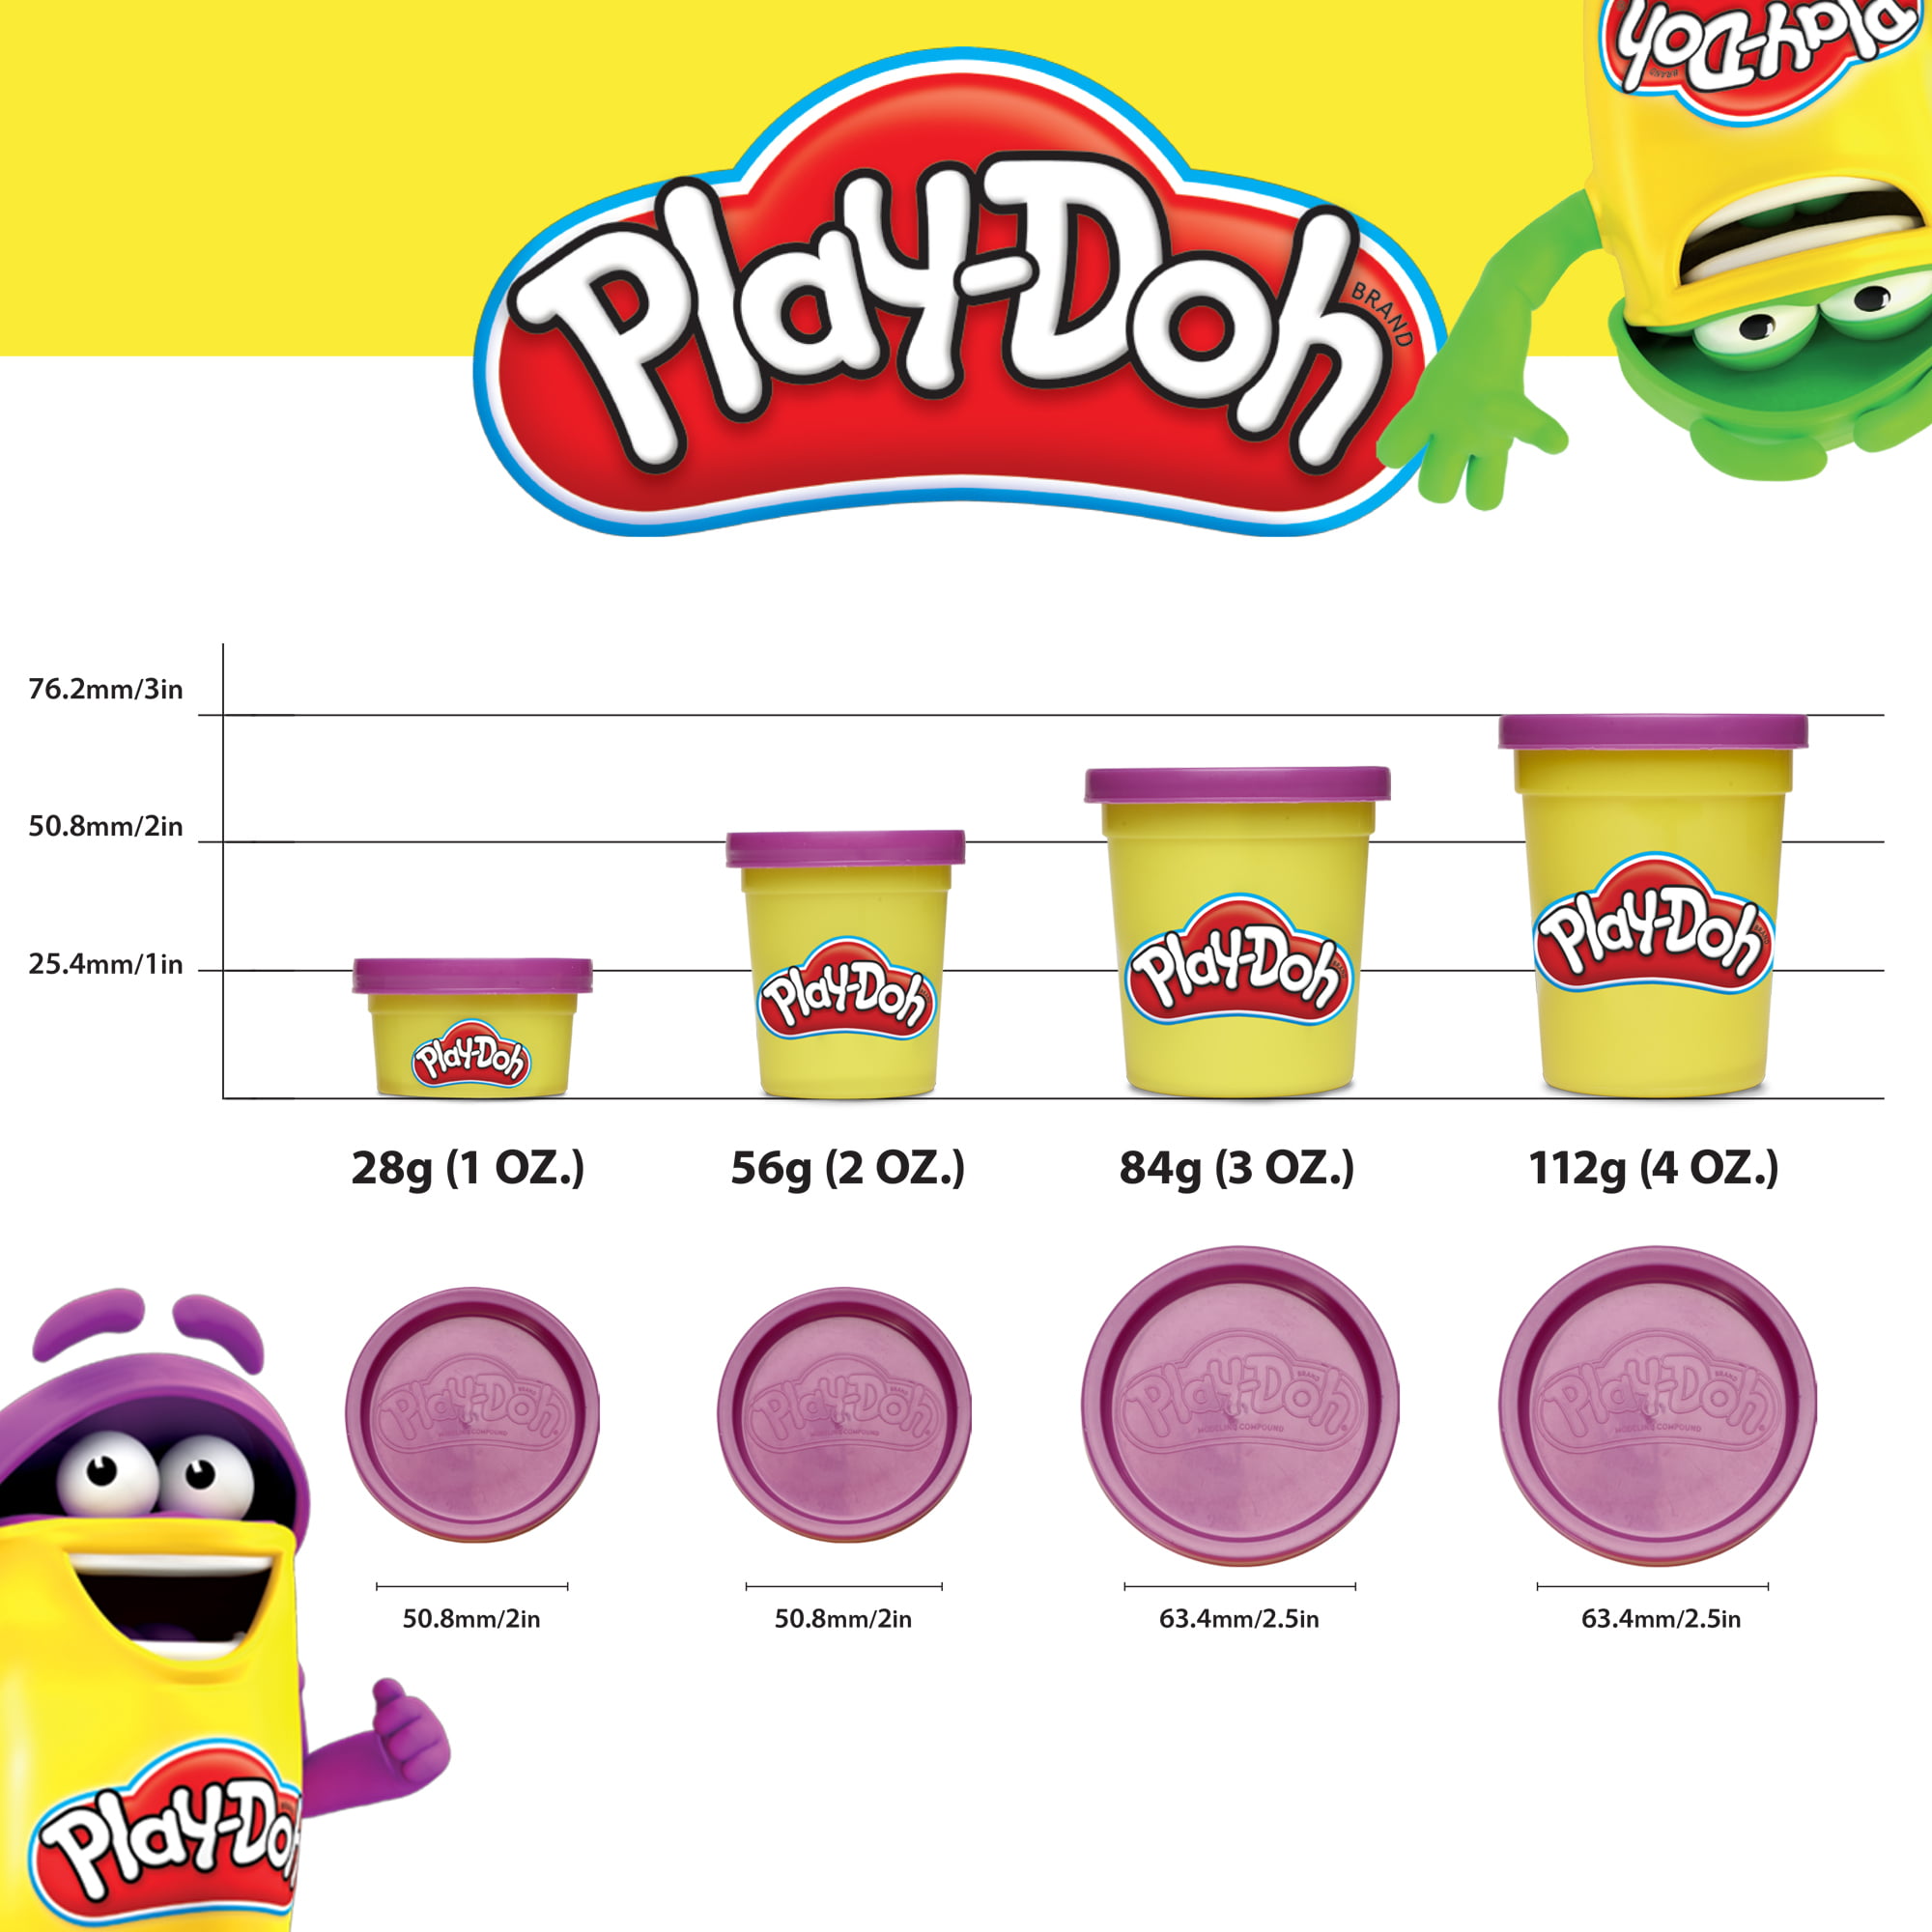 Play-Doh Bulk Spring Colors 12-Pack of Non-Toxic Modeling Compound 4-Ounce Cans